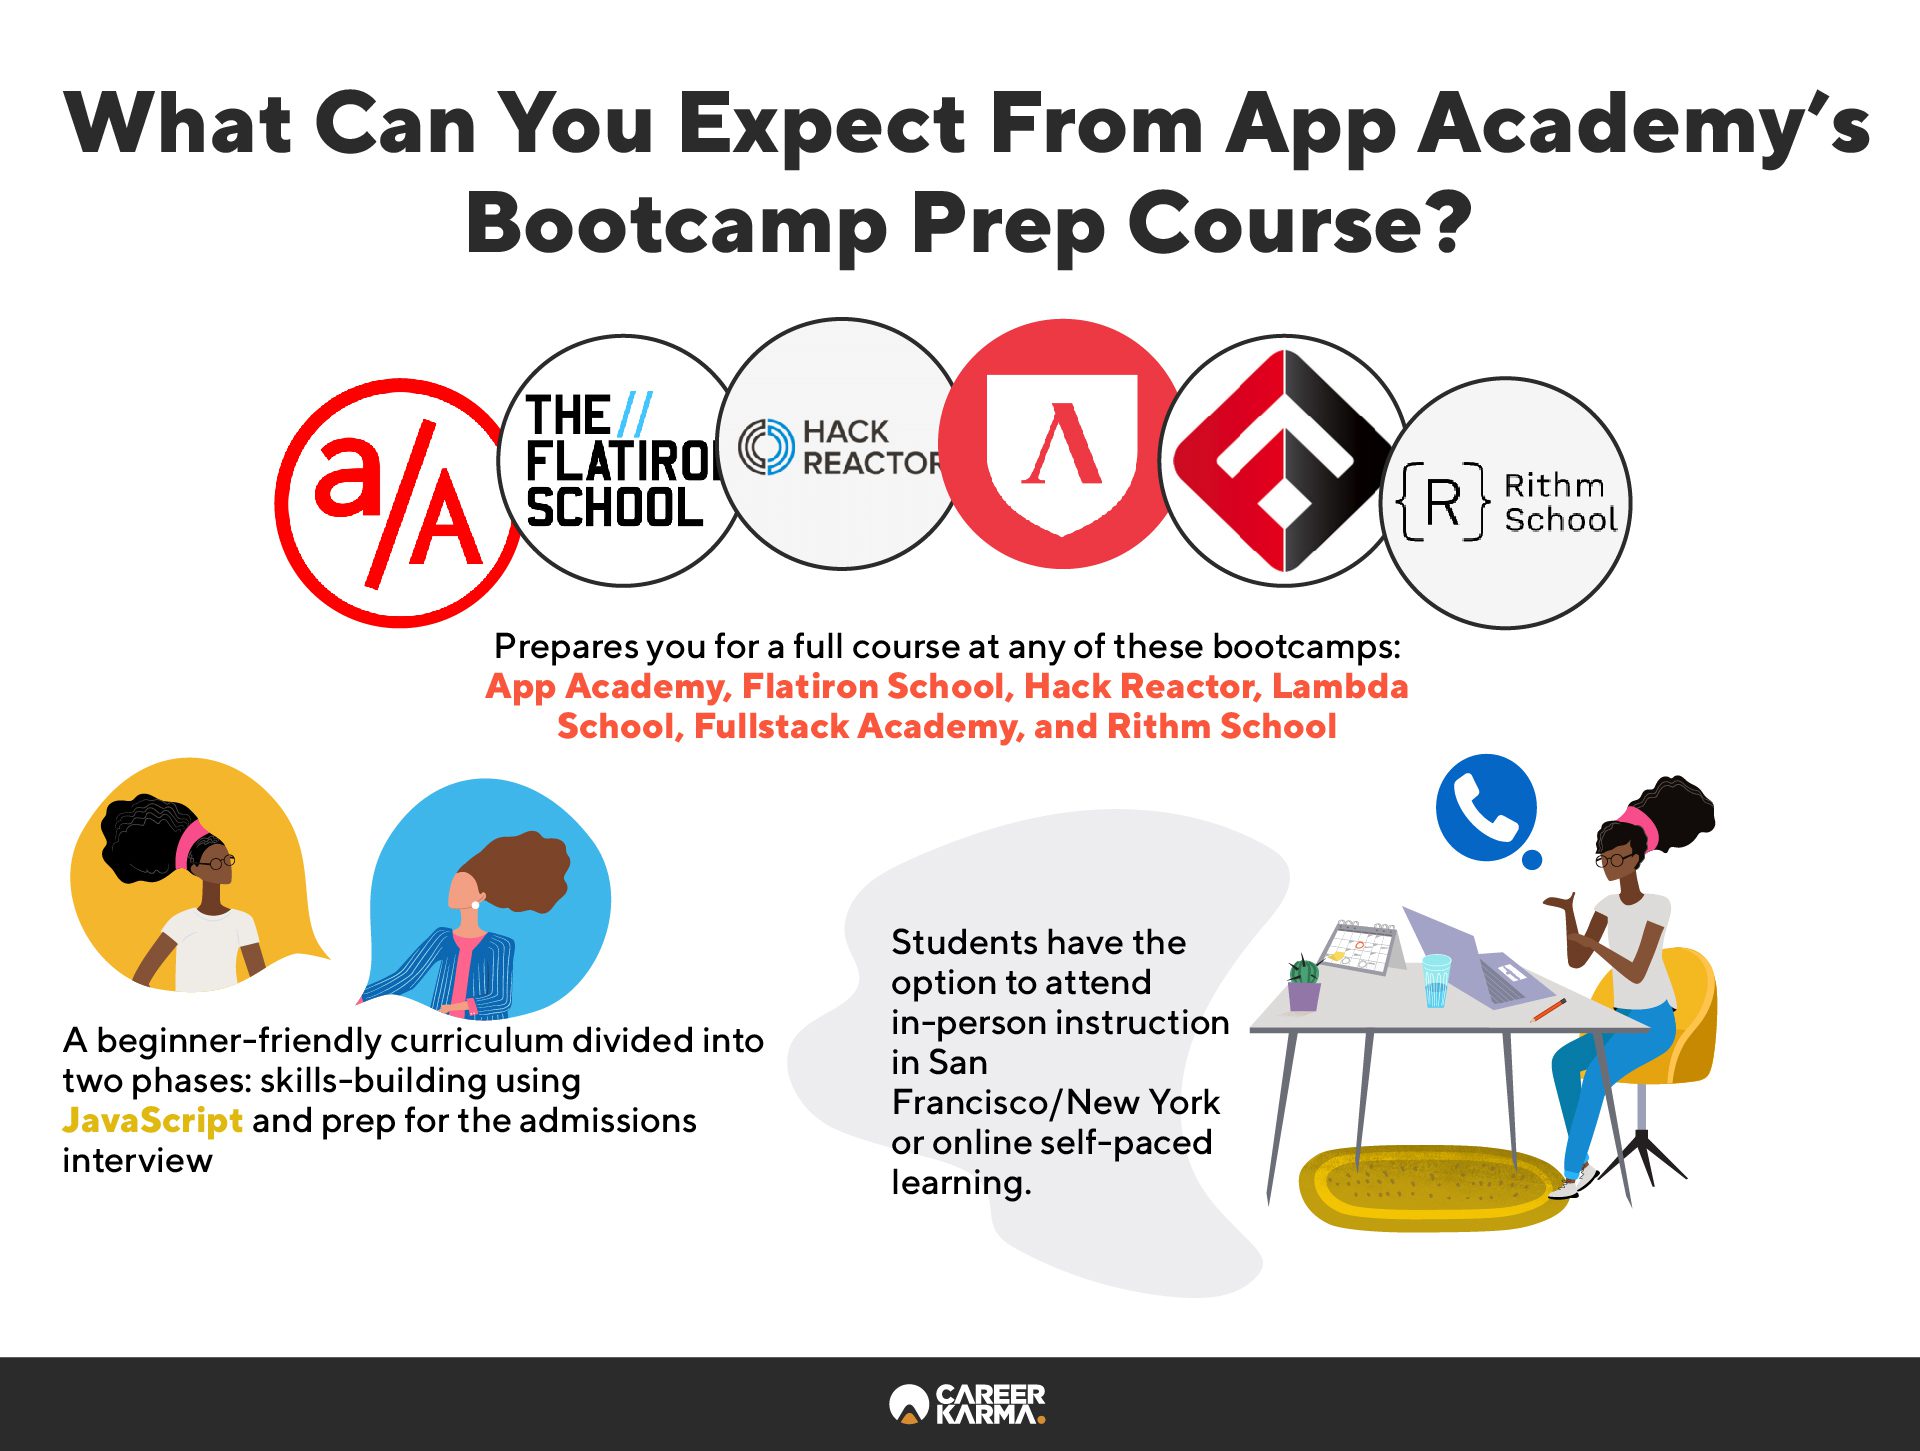 Infographic covering App Academy’s prep course